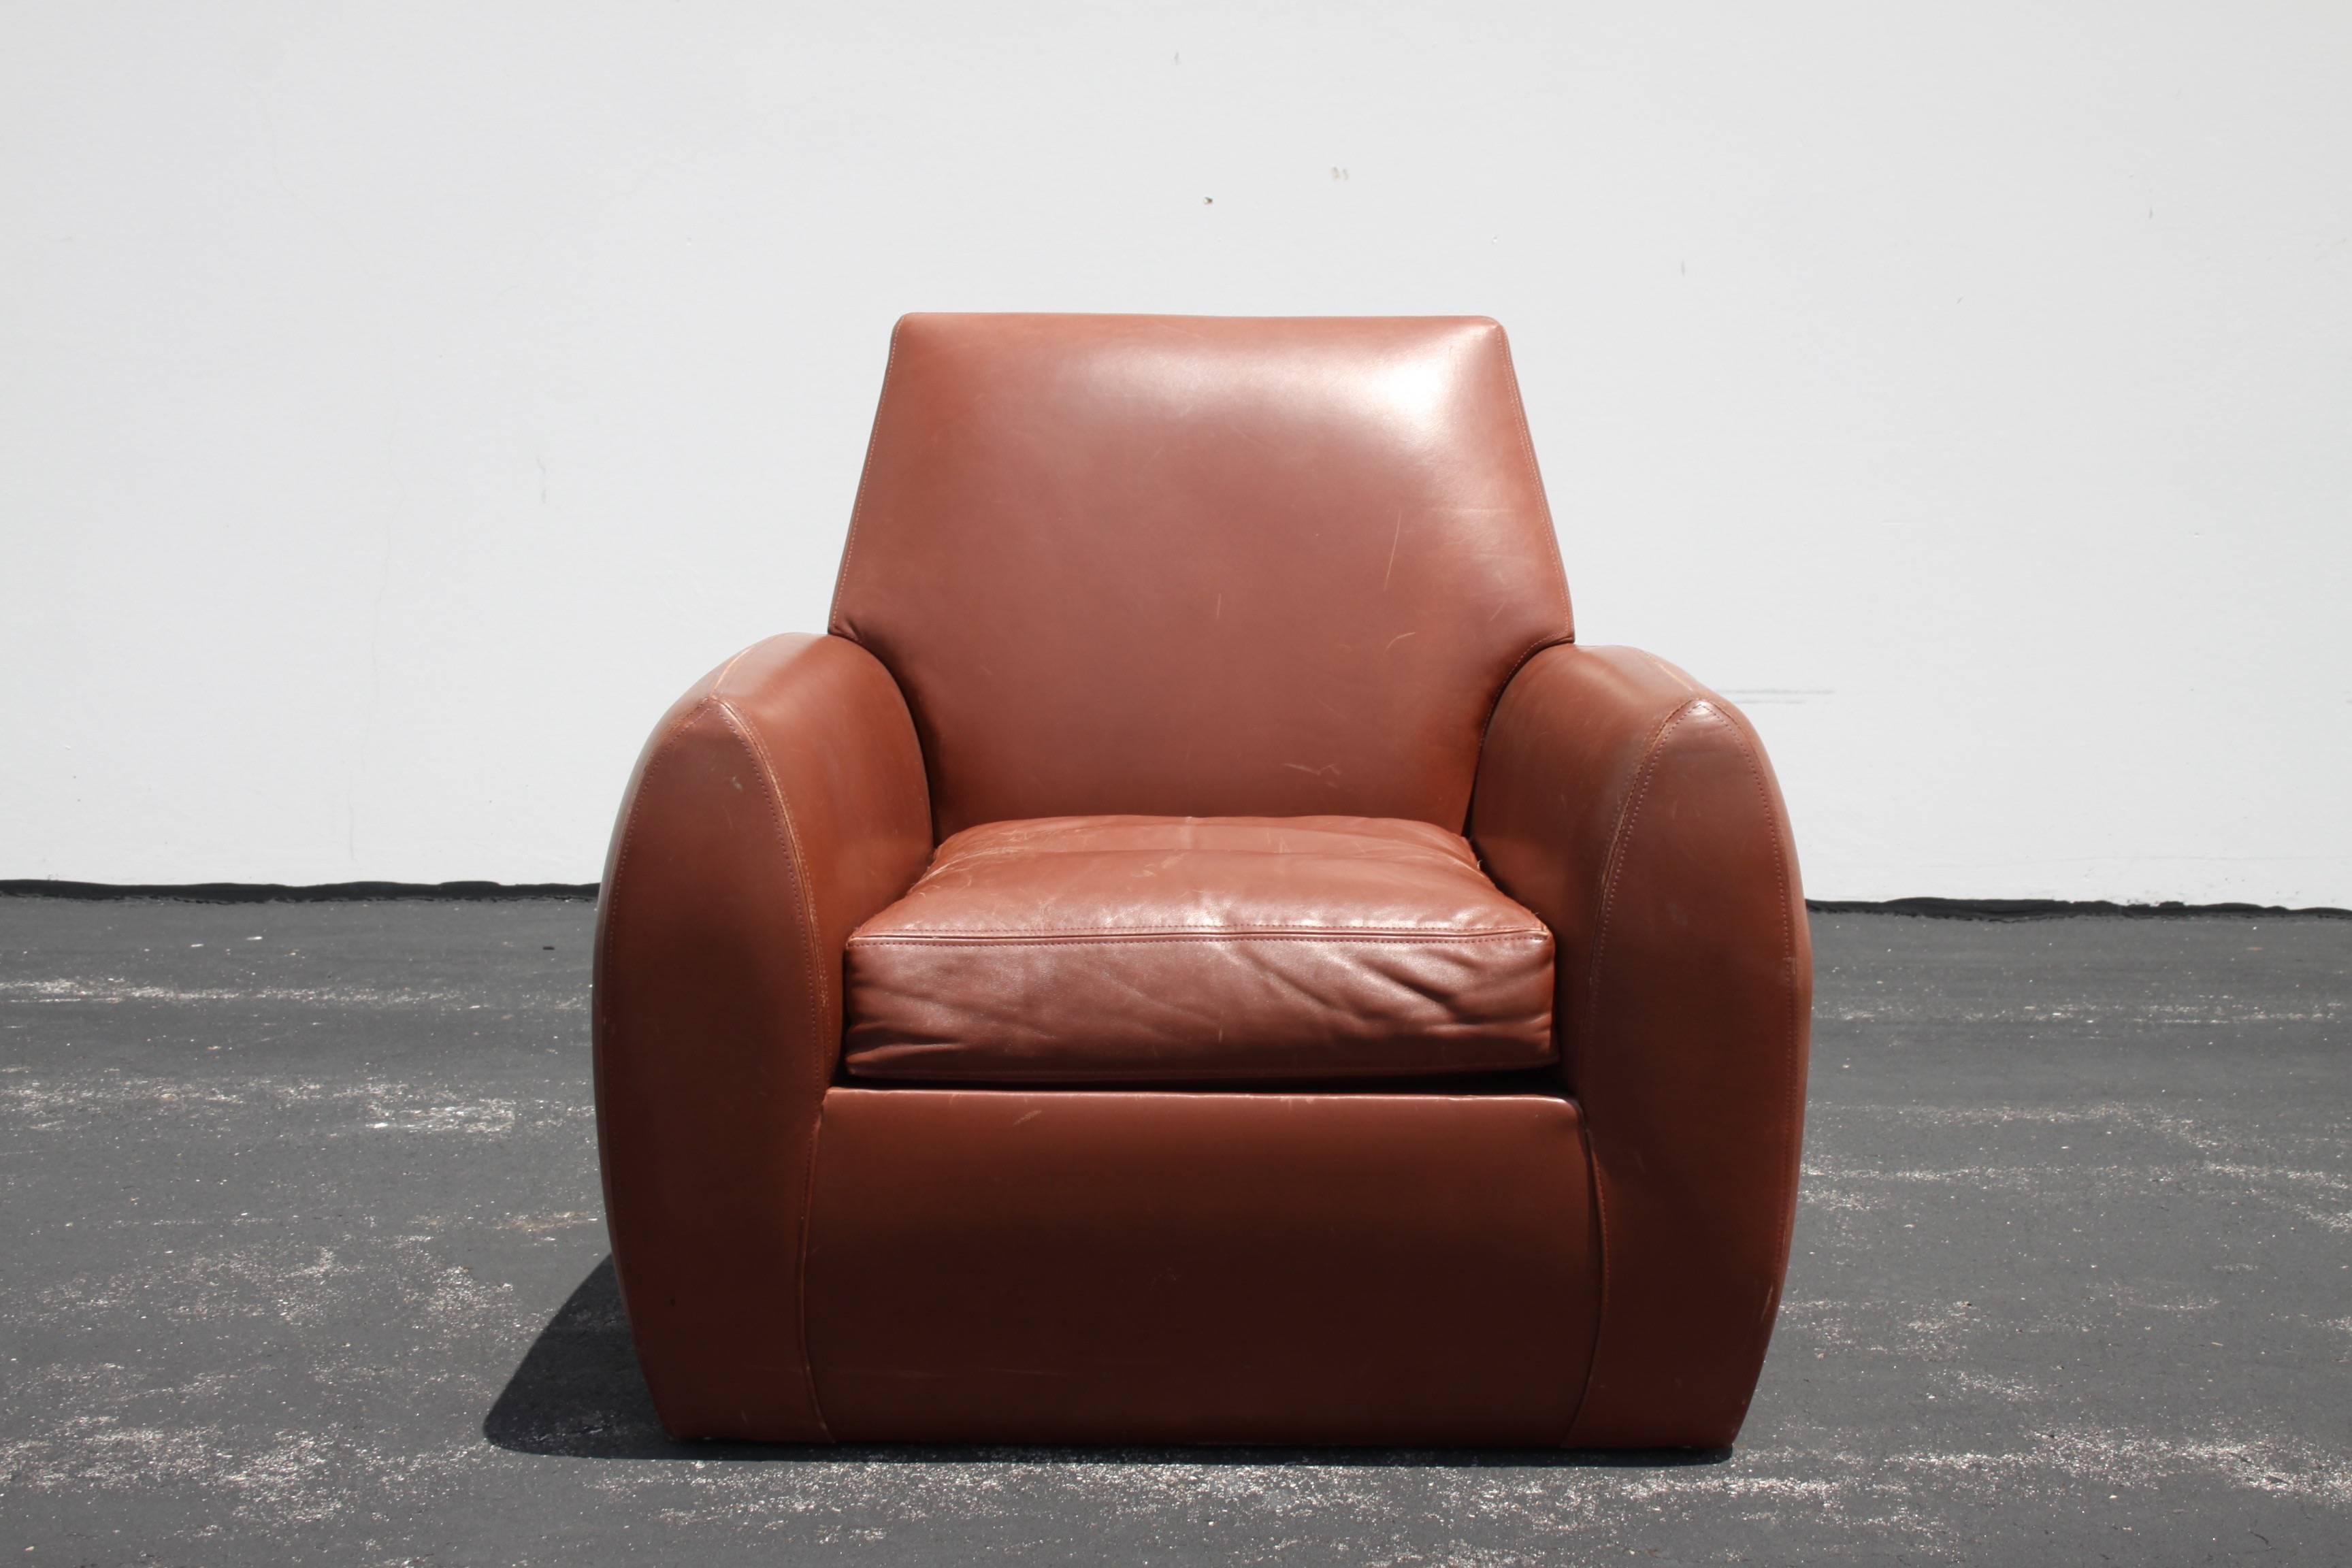 Dakota Jackson Ke-Zu leather club or lounge chair. Leather shows wear or distress, which give is a nice vintage feel, like the vintage French Deco club chairs it resembles. One chair shown, other has similar wear. Very comfortable club chair.